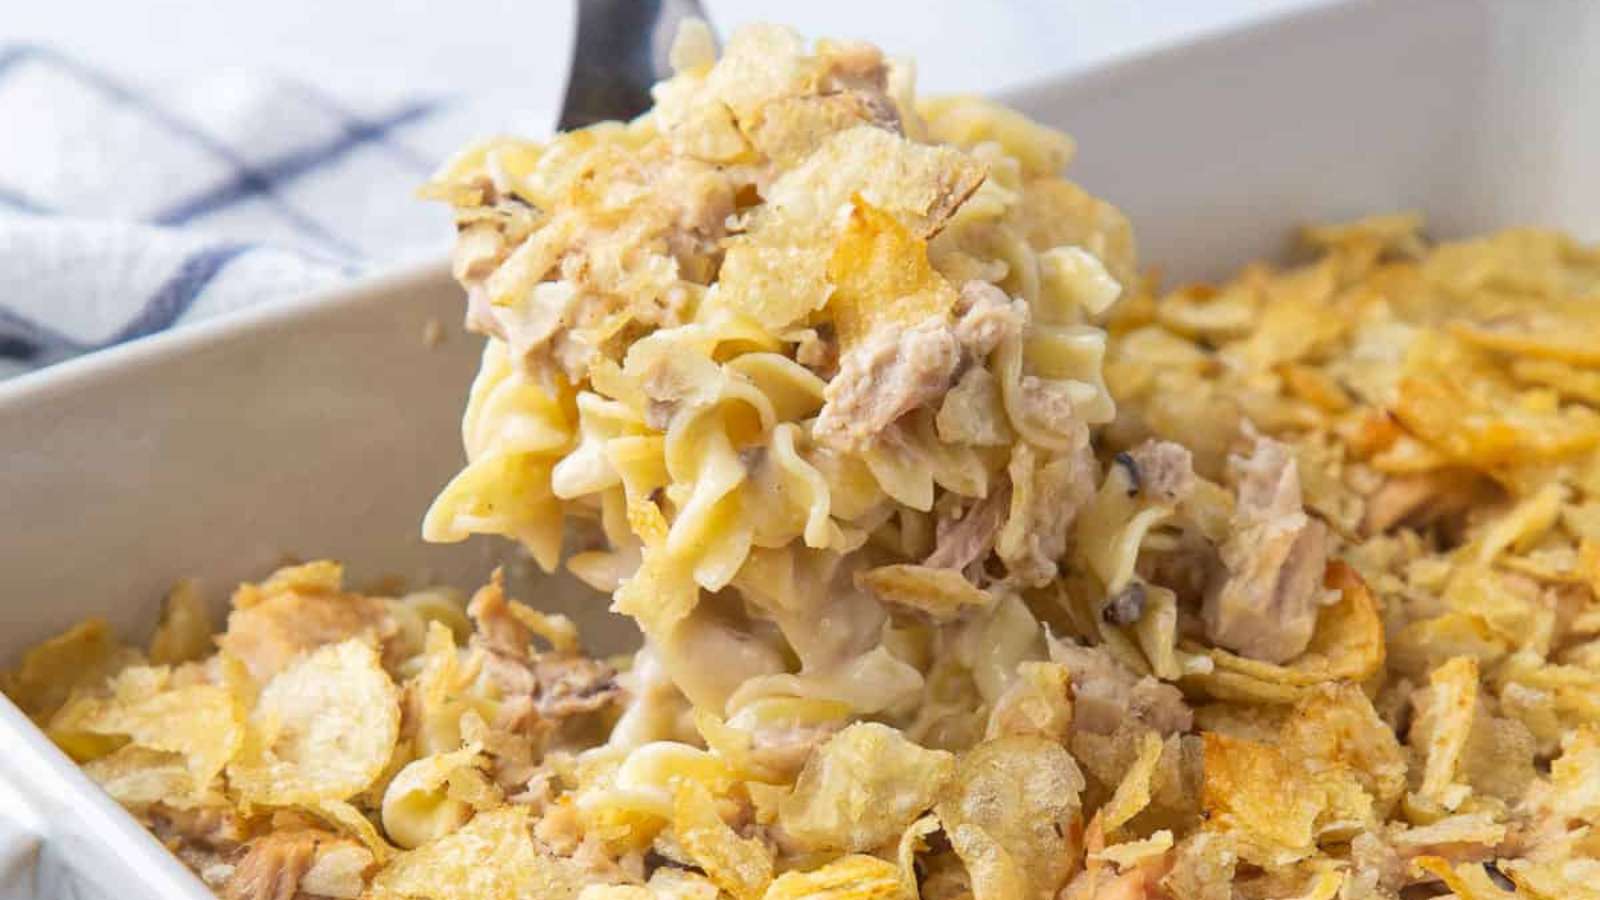 A casserole dish with a scoop of chicken noodle casserole.